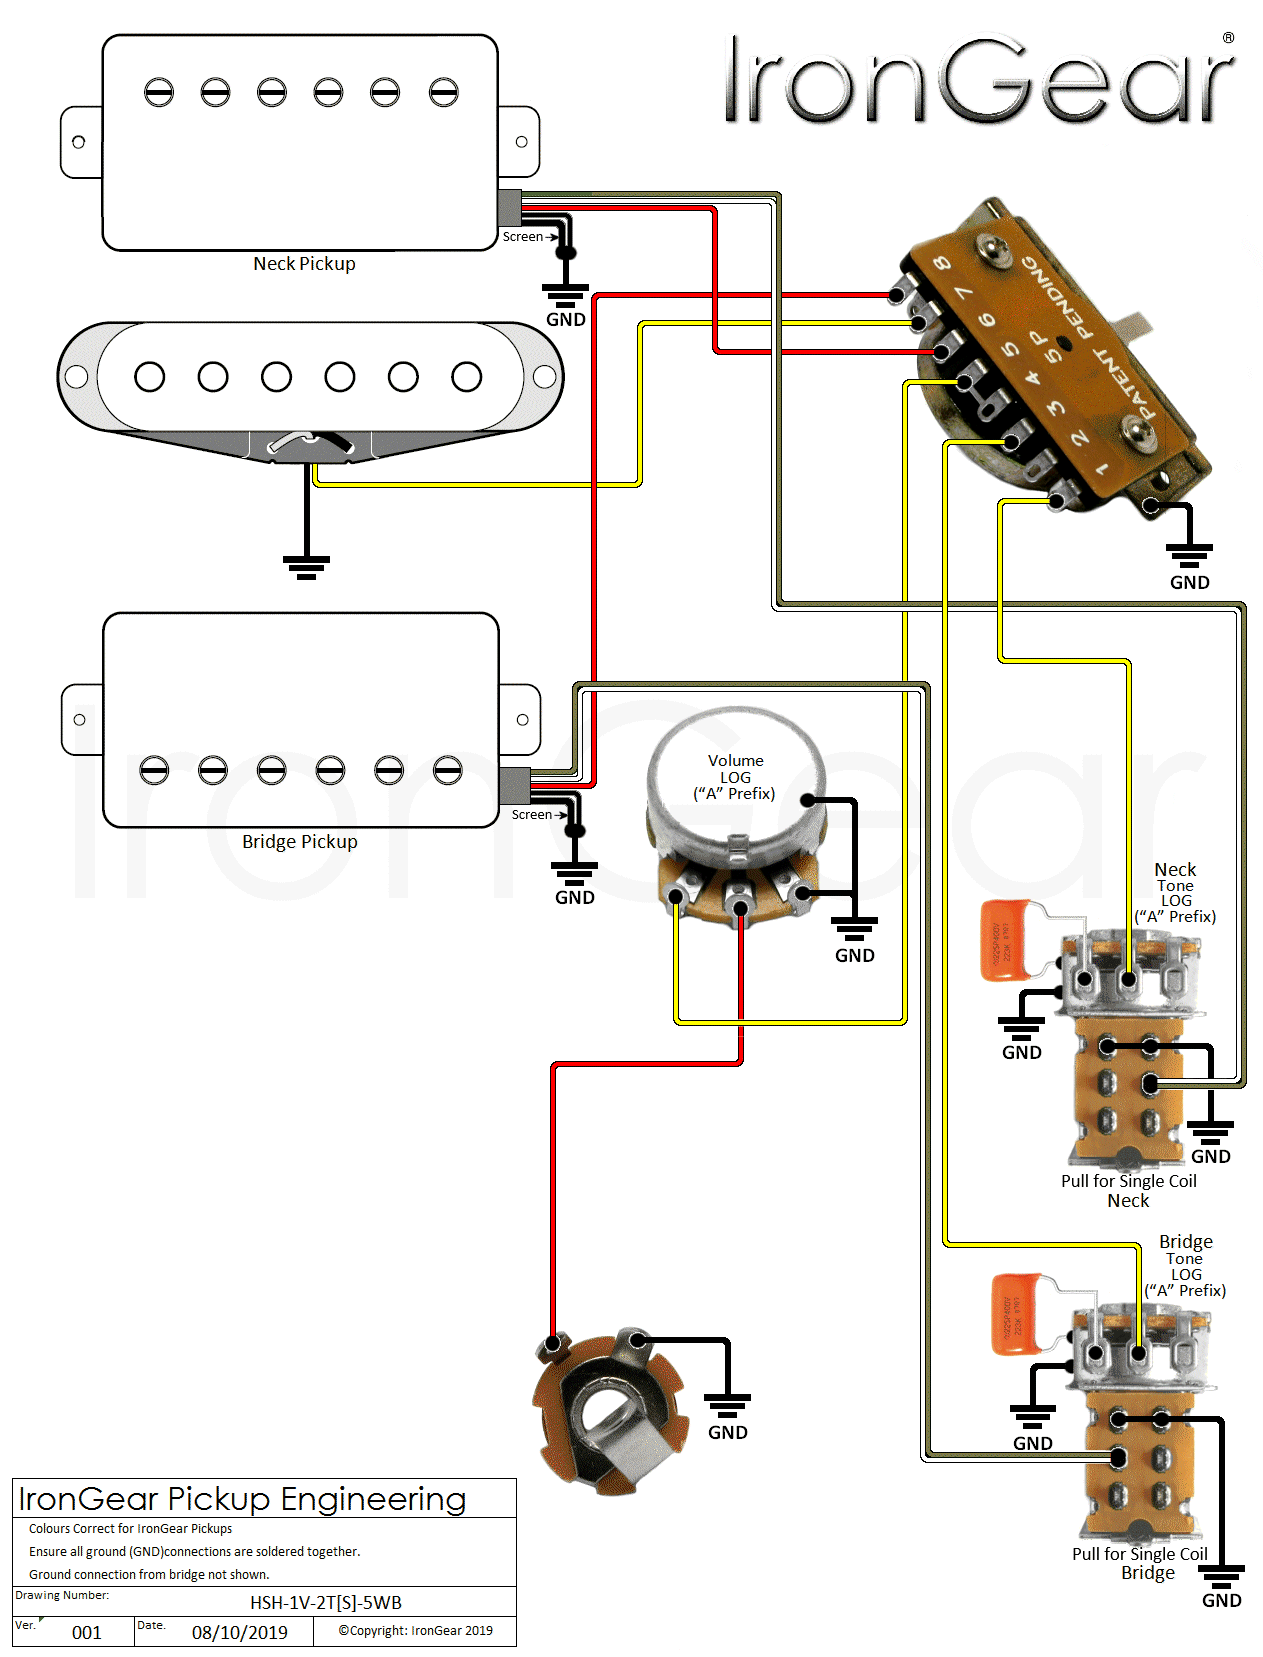 Wiring Diagram For 3 Pickup Strat With 5 Way Switch from www.irongear.co.uk